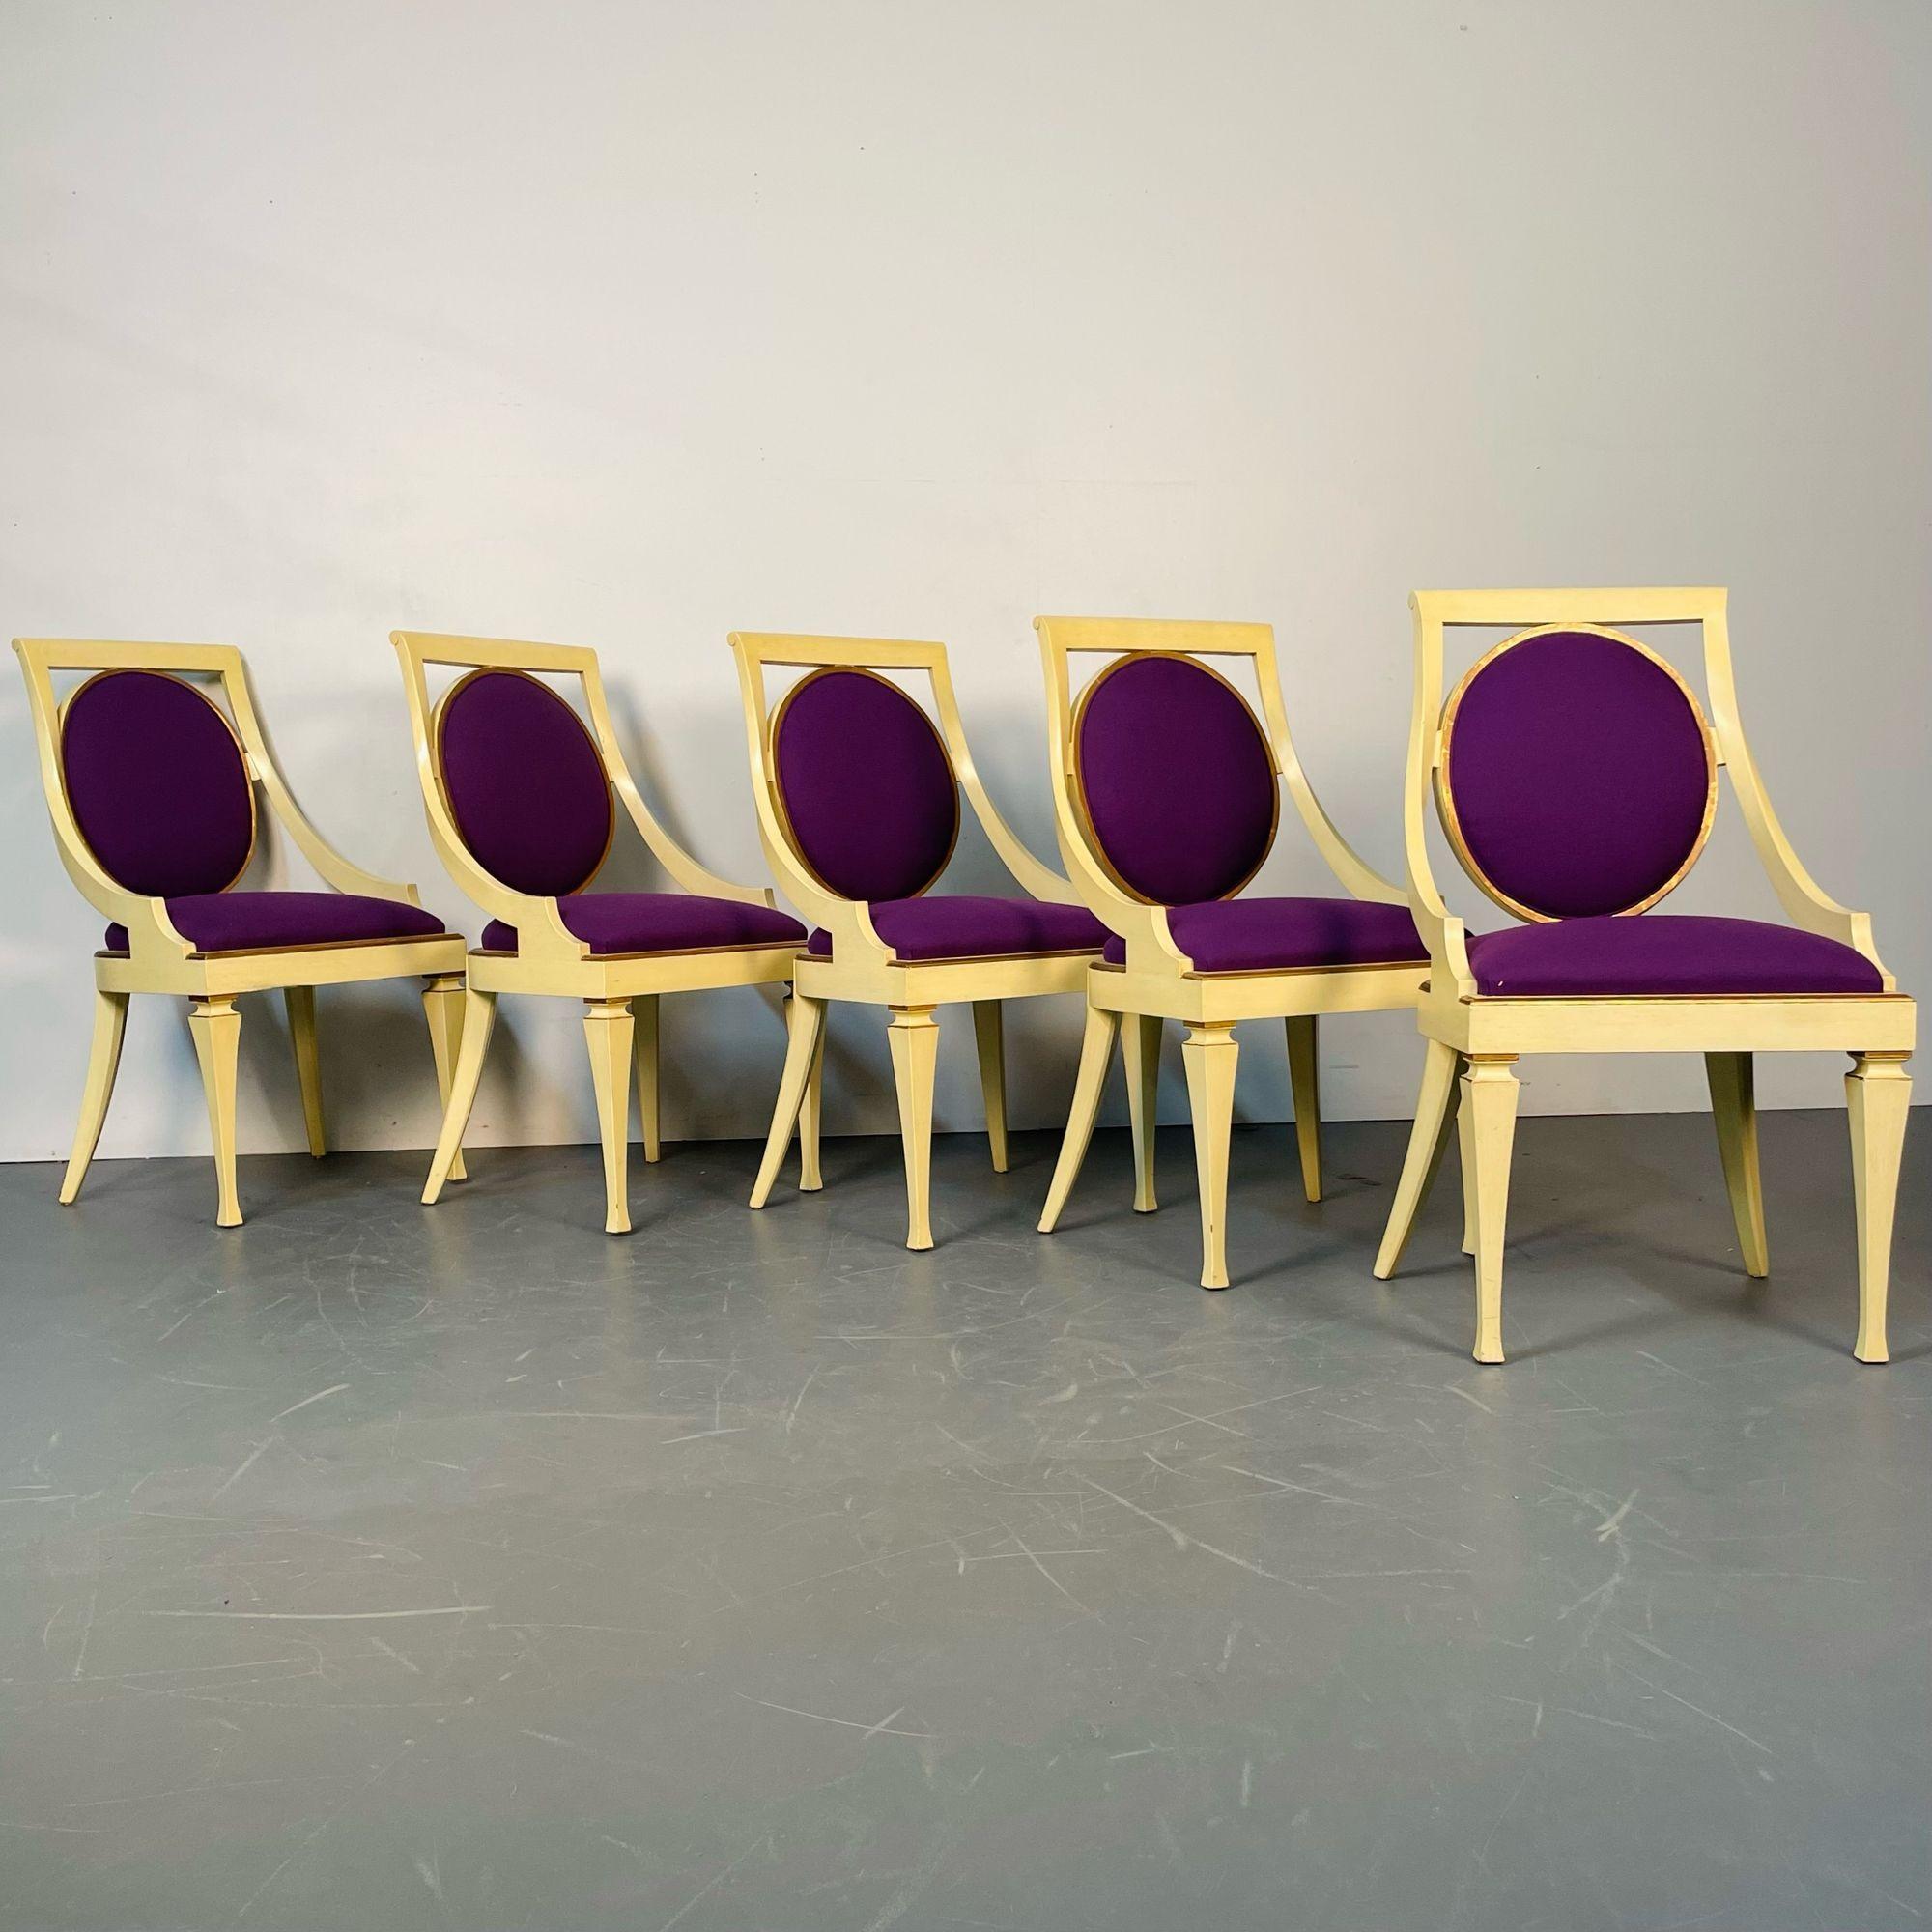 Set of Five John Widdicomb Dining / Side Chairs, Art Deco, Gold Leaf, Purple
 
Five American midcentury or Deco Style dining / side chairs having cream frames with purple velvet fabric and gold trim. 
 
Wood, Gold Leaf, Fabric
United States,